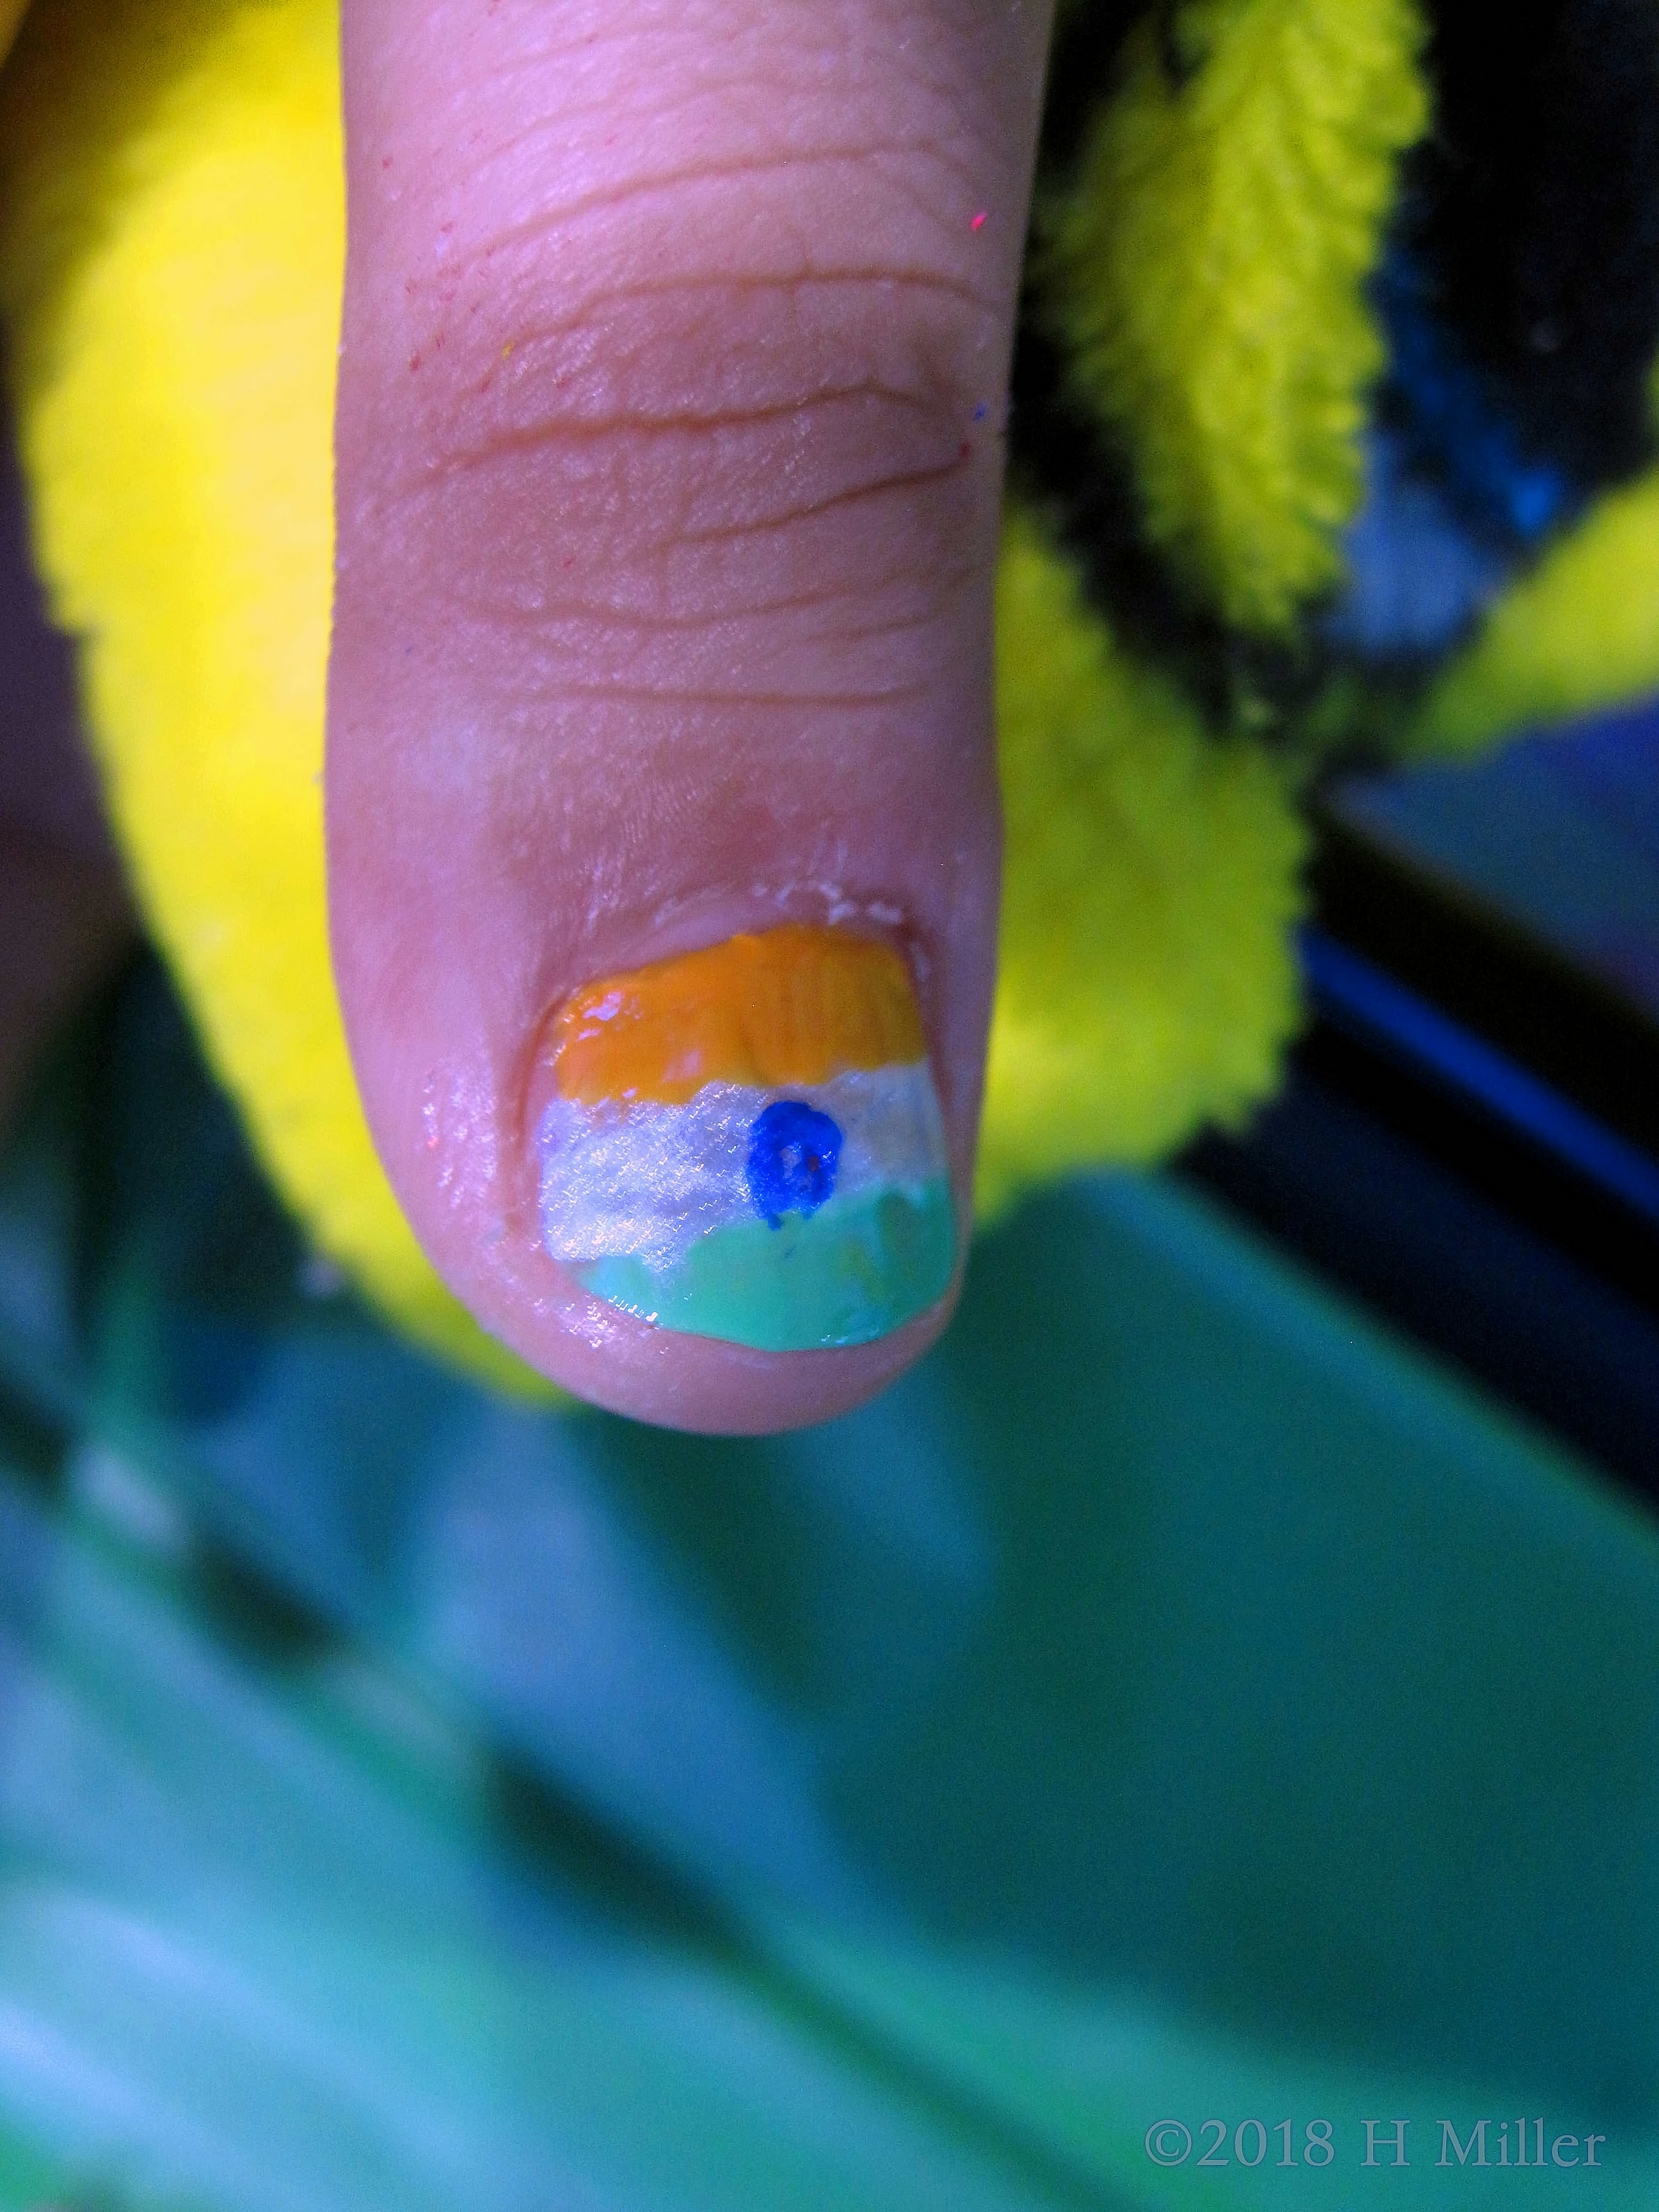 Repping For India With This Cool Nail Art Design 